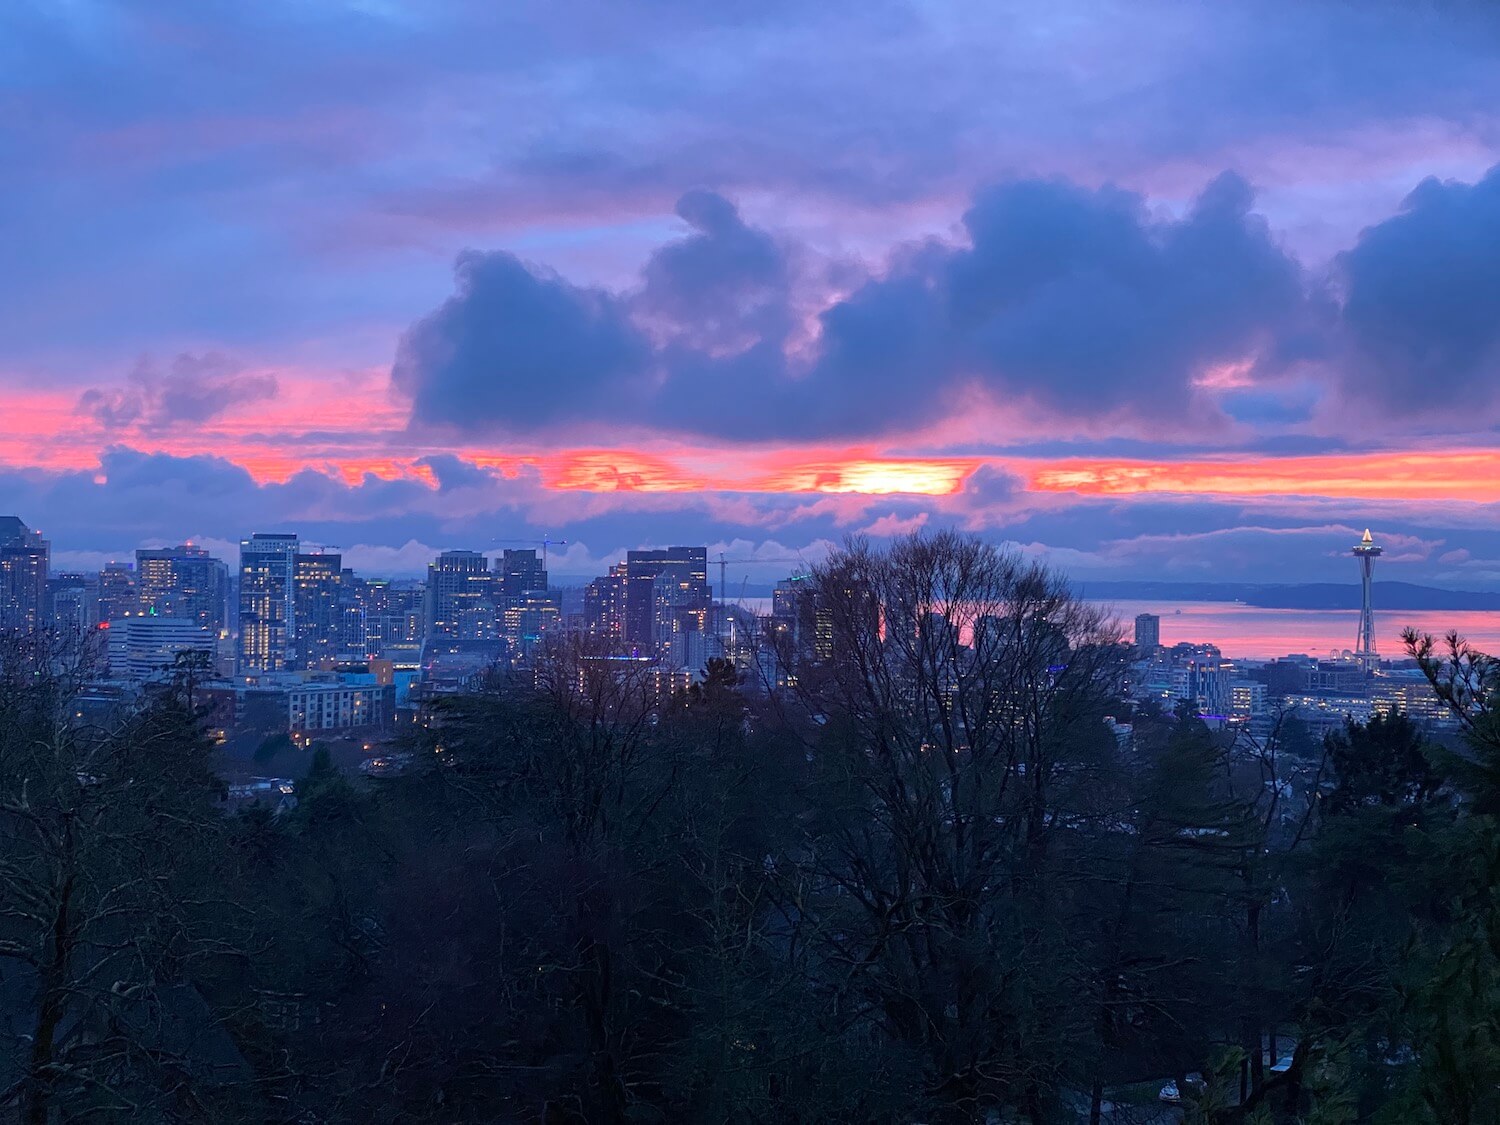 A beautiful winter scene viewing from the Volunteer Park Water Tower at sunset. This view of Seattle shows dark deciduous and fir trees with a layer of dusk lighted downtown office buildings while the bright orange sun sets amongst purple and blue clouds.